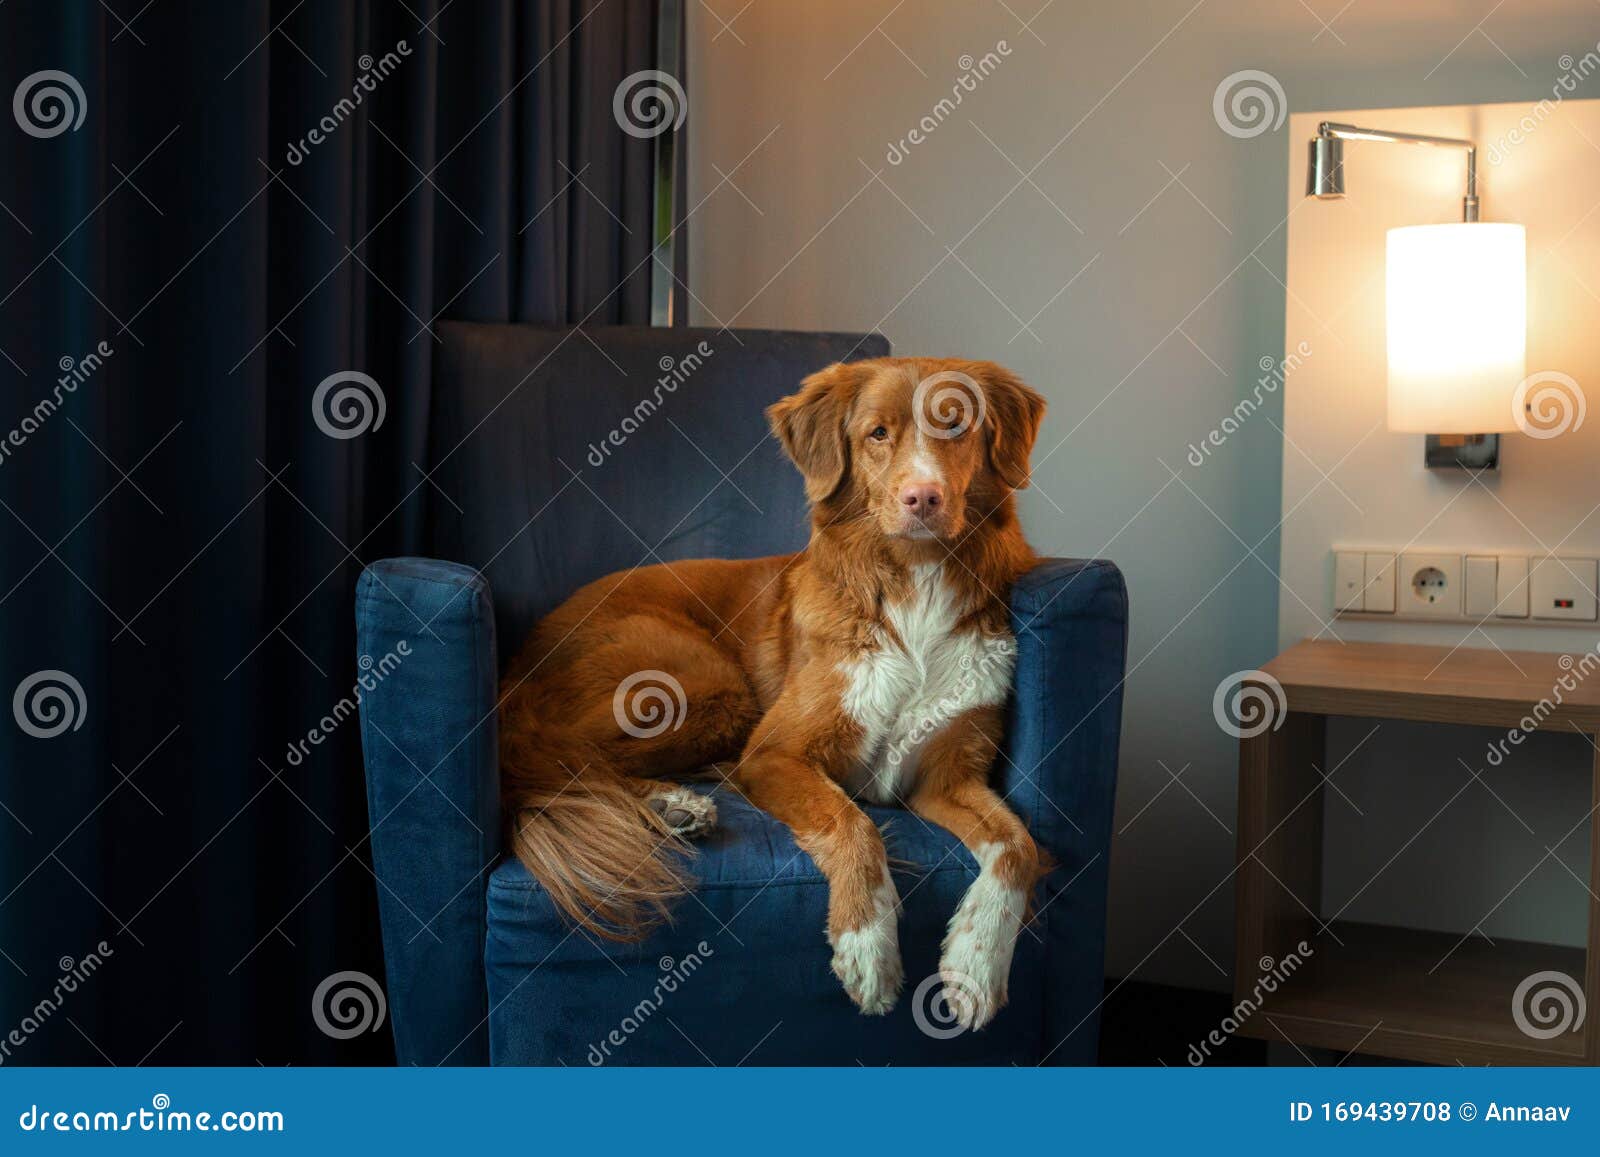 Dog On A Couch In The Interior Of A Hotel Or Home Nova Scotia Duck Tolling Retriever Indoor Stock Photo Image Of Apartment Hotel 169439708